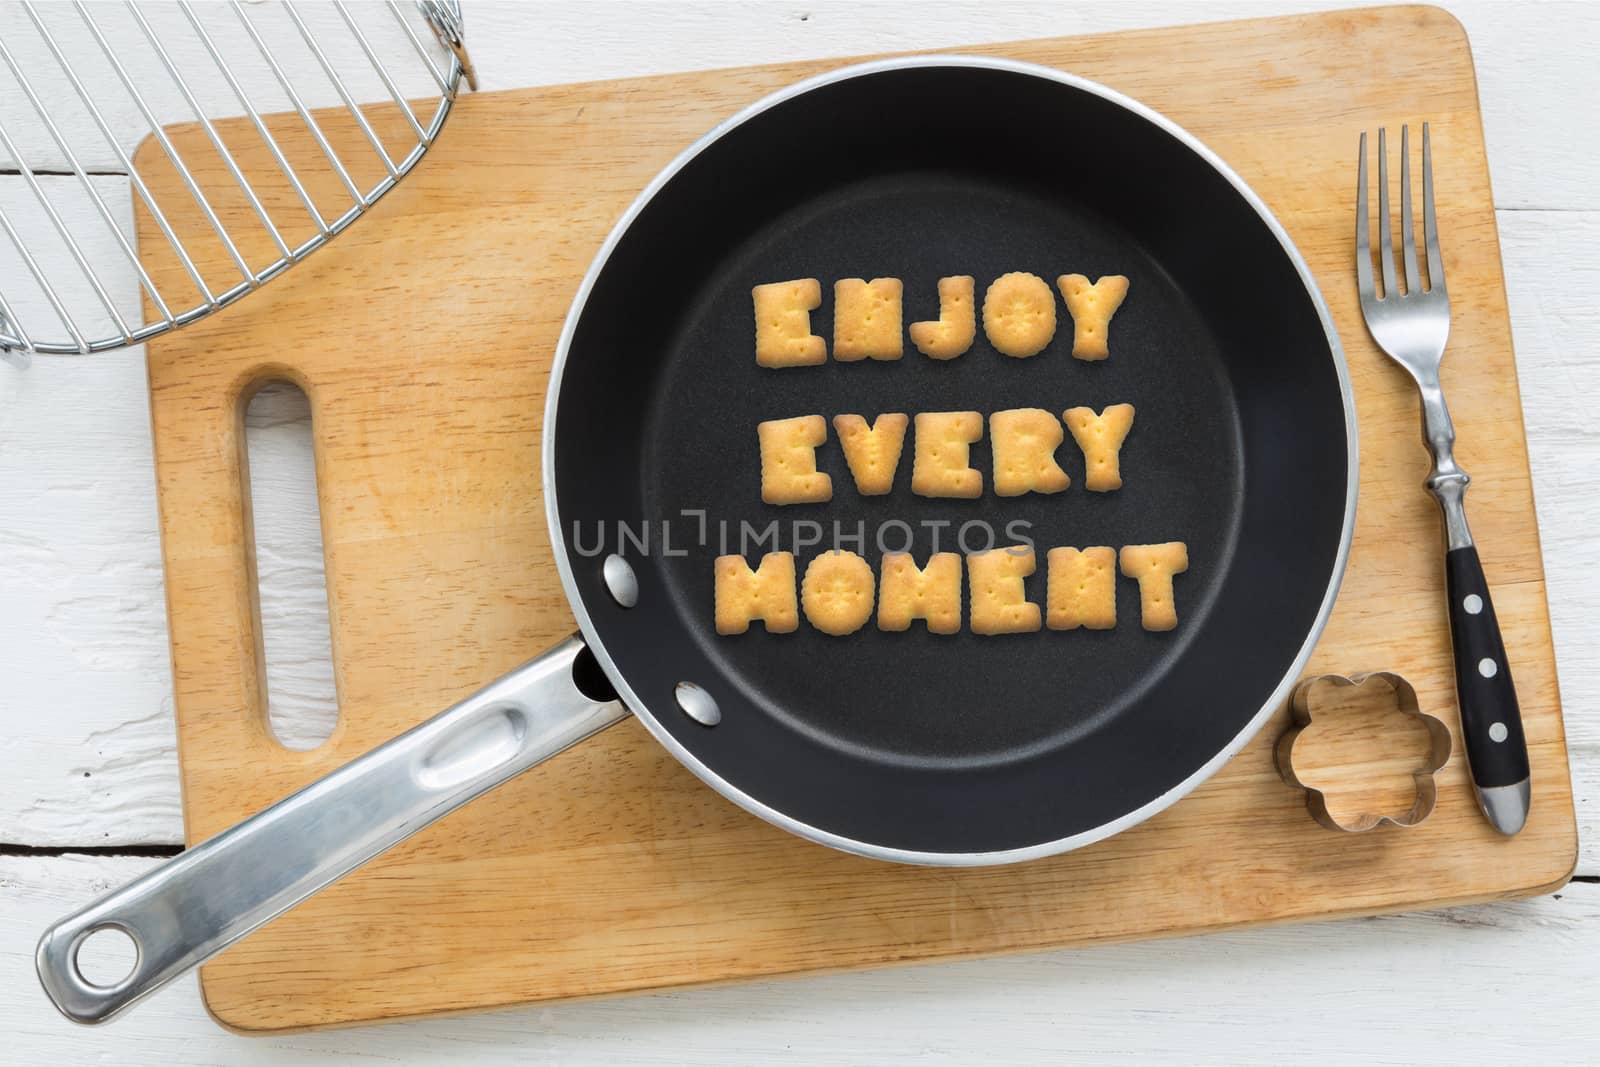 Alphabet crackers quote ENJOY EVERY MOMENT putting in pan by vinnstock